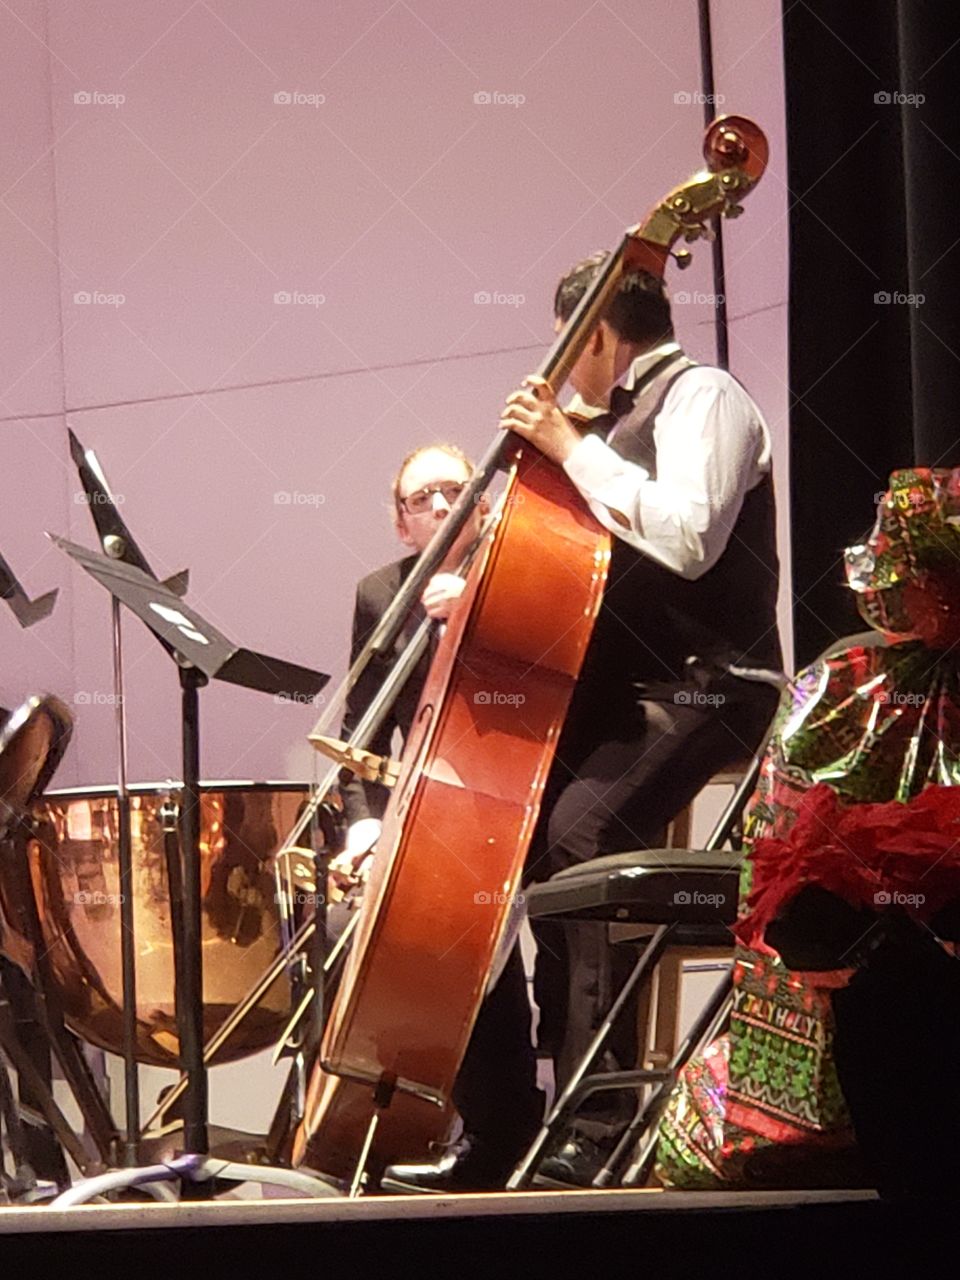 bass playing in an orchestra concert